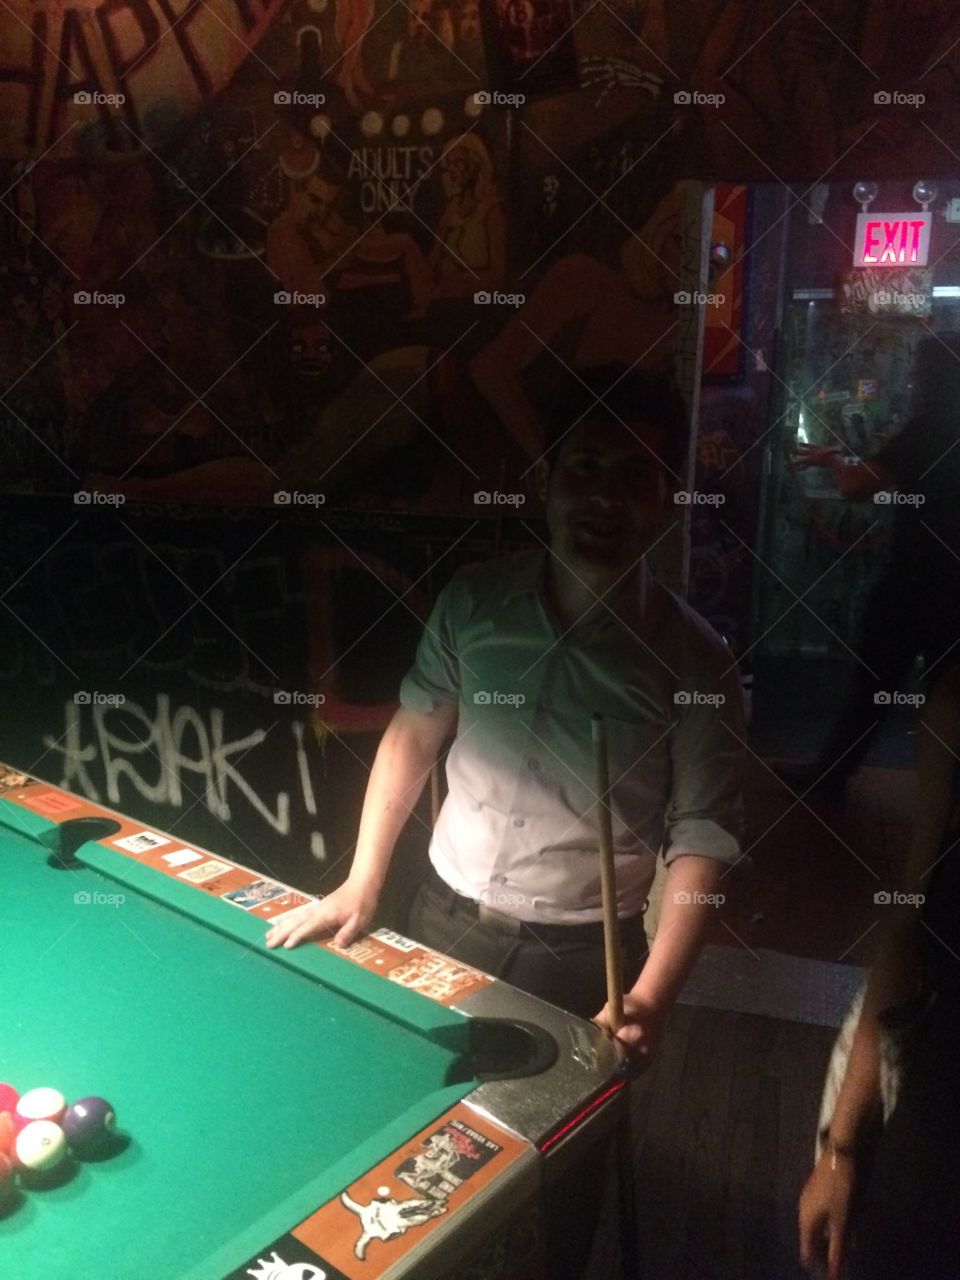 Playing pool at dive bar in new york city.